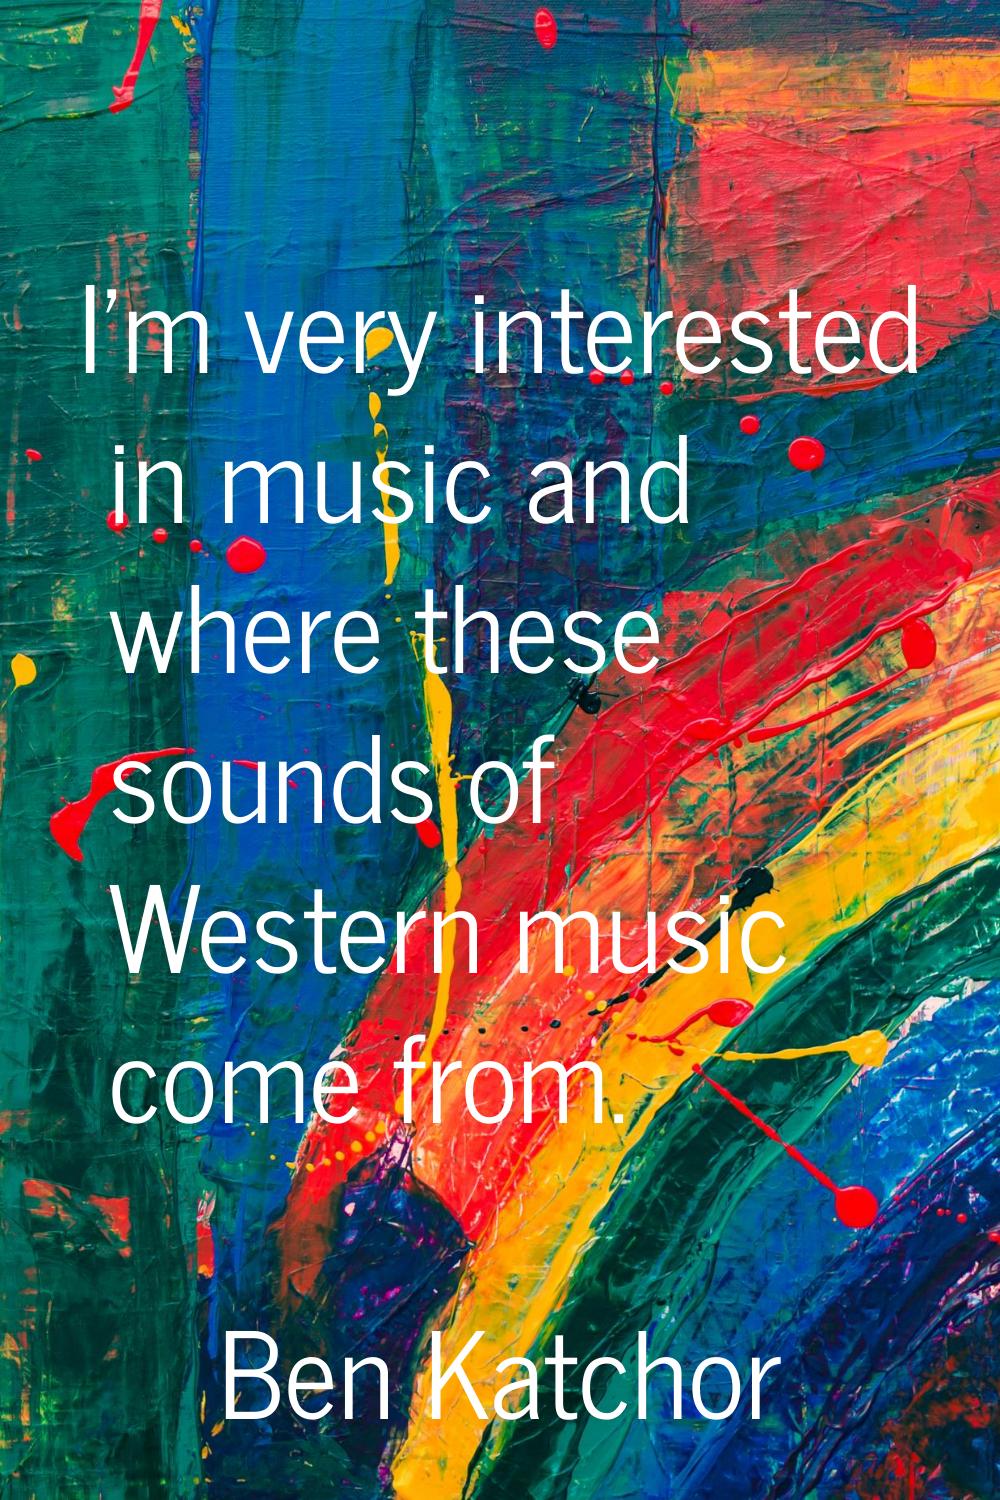 I'm very interested in music and where these sounds of Western music come from.